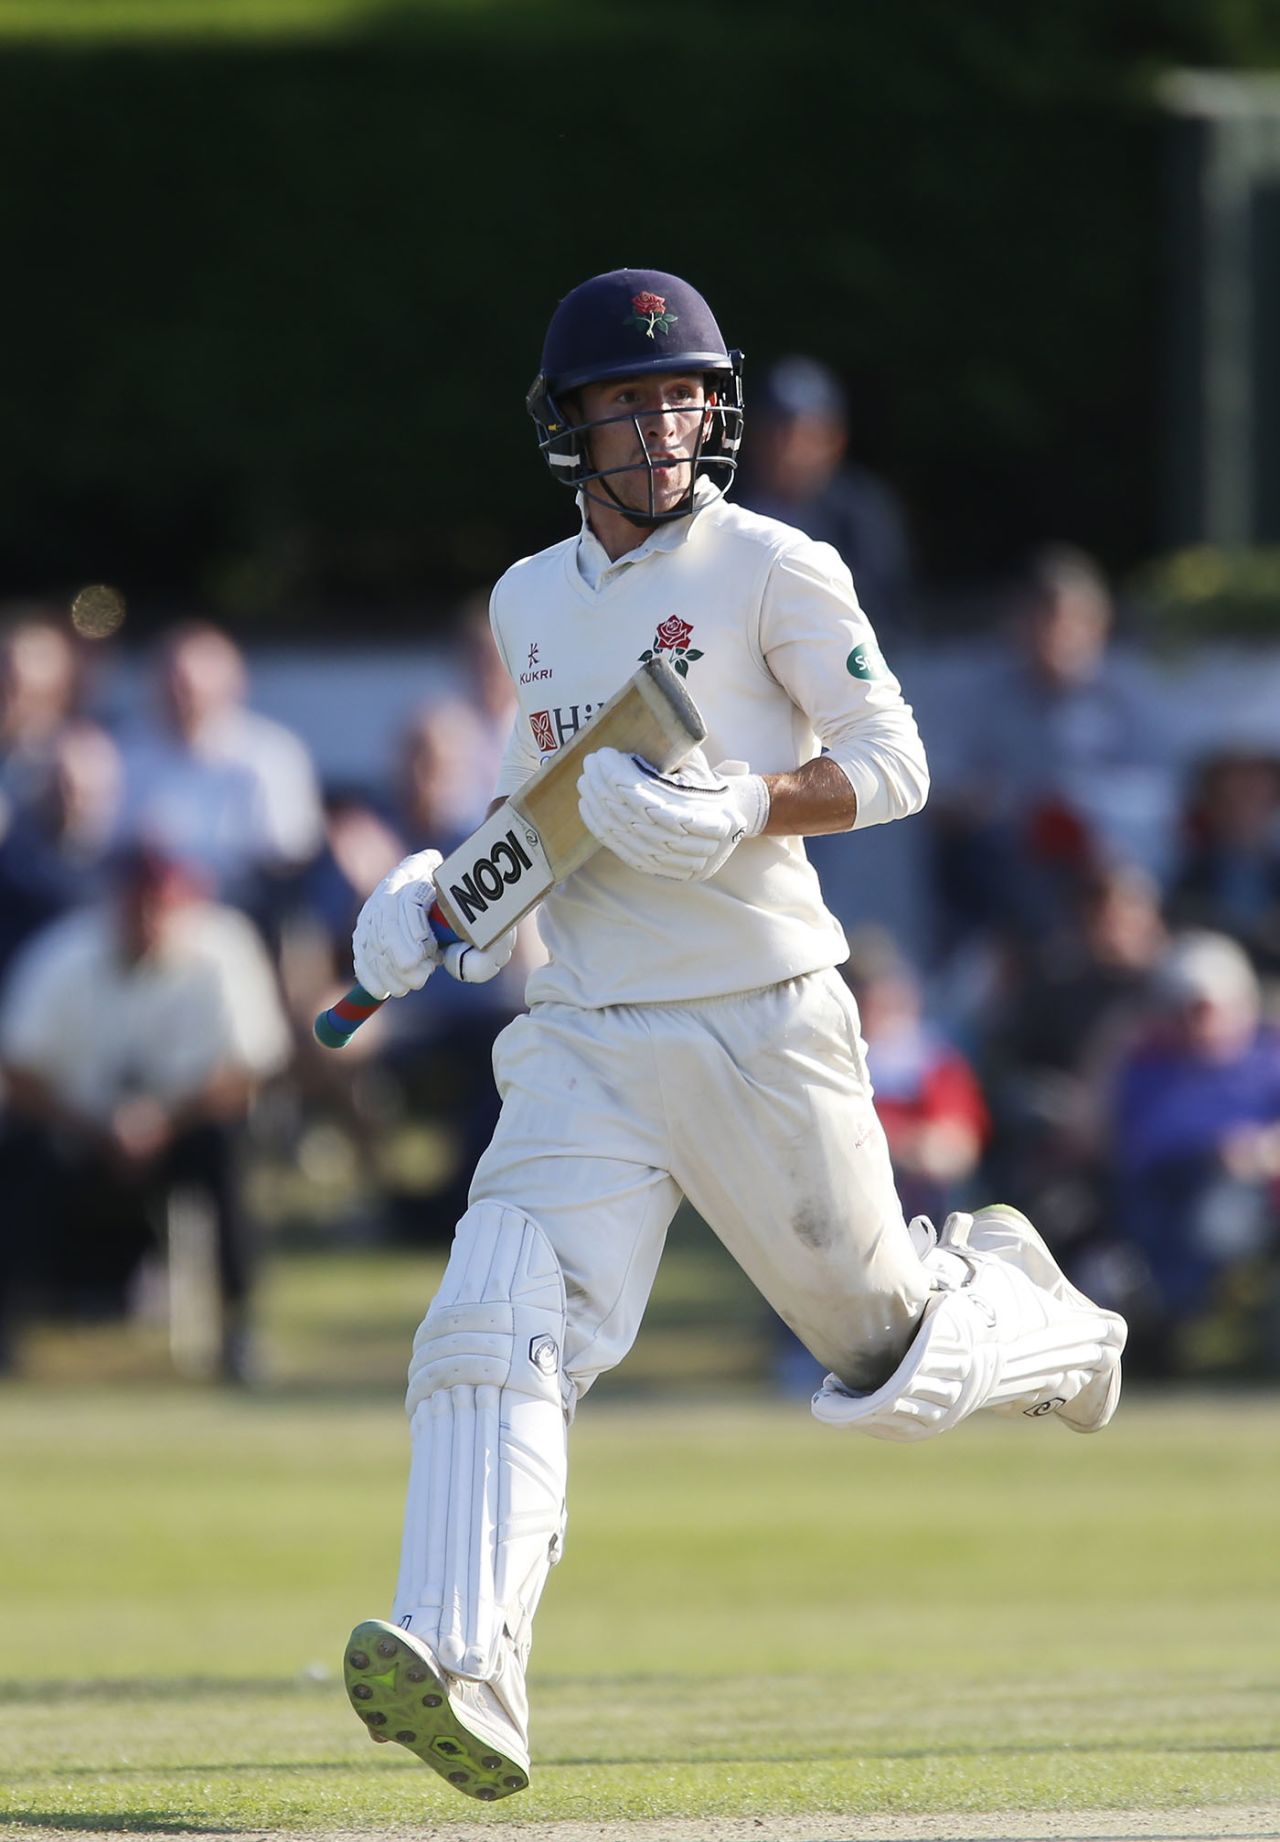 Josh Bohannon, Lancashire v Worcestershire,County Championship Division Two, Southport, 31 August, 2018 